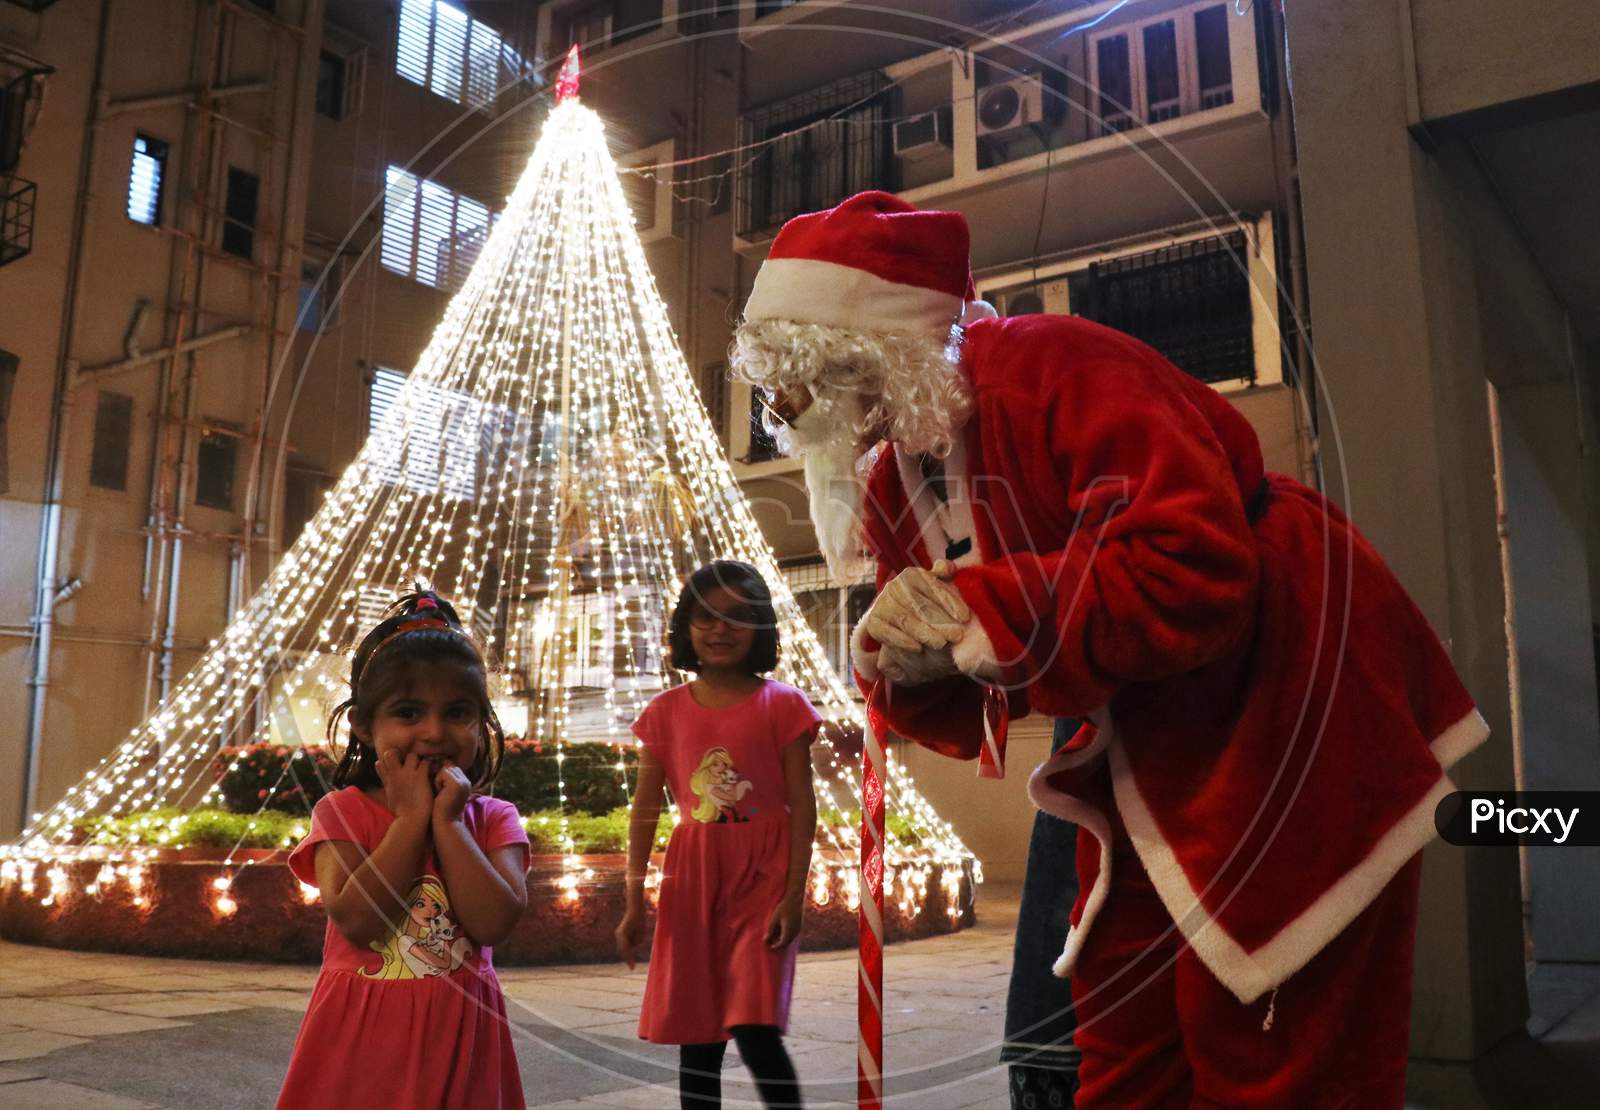 A woman dressed as Santa Claus interacts with kids at a residential area on Christmas eve in Mumbai, India, December 24, 2020.